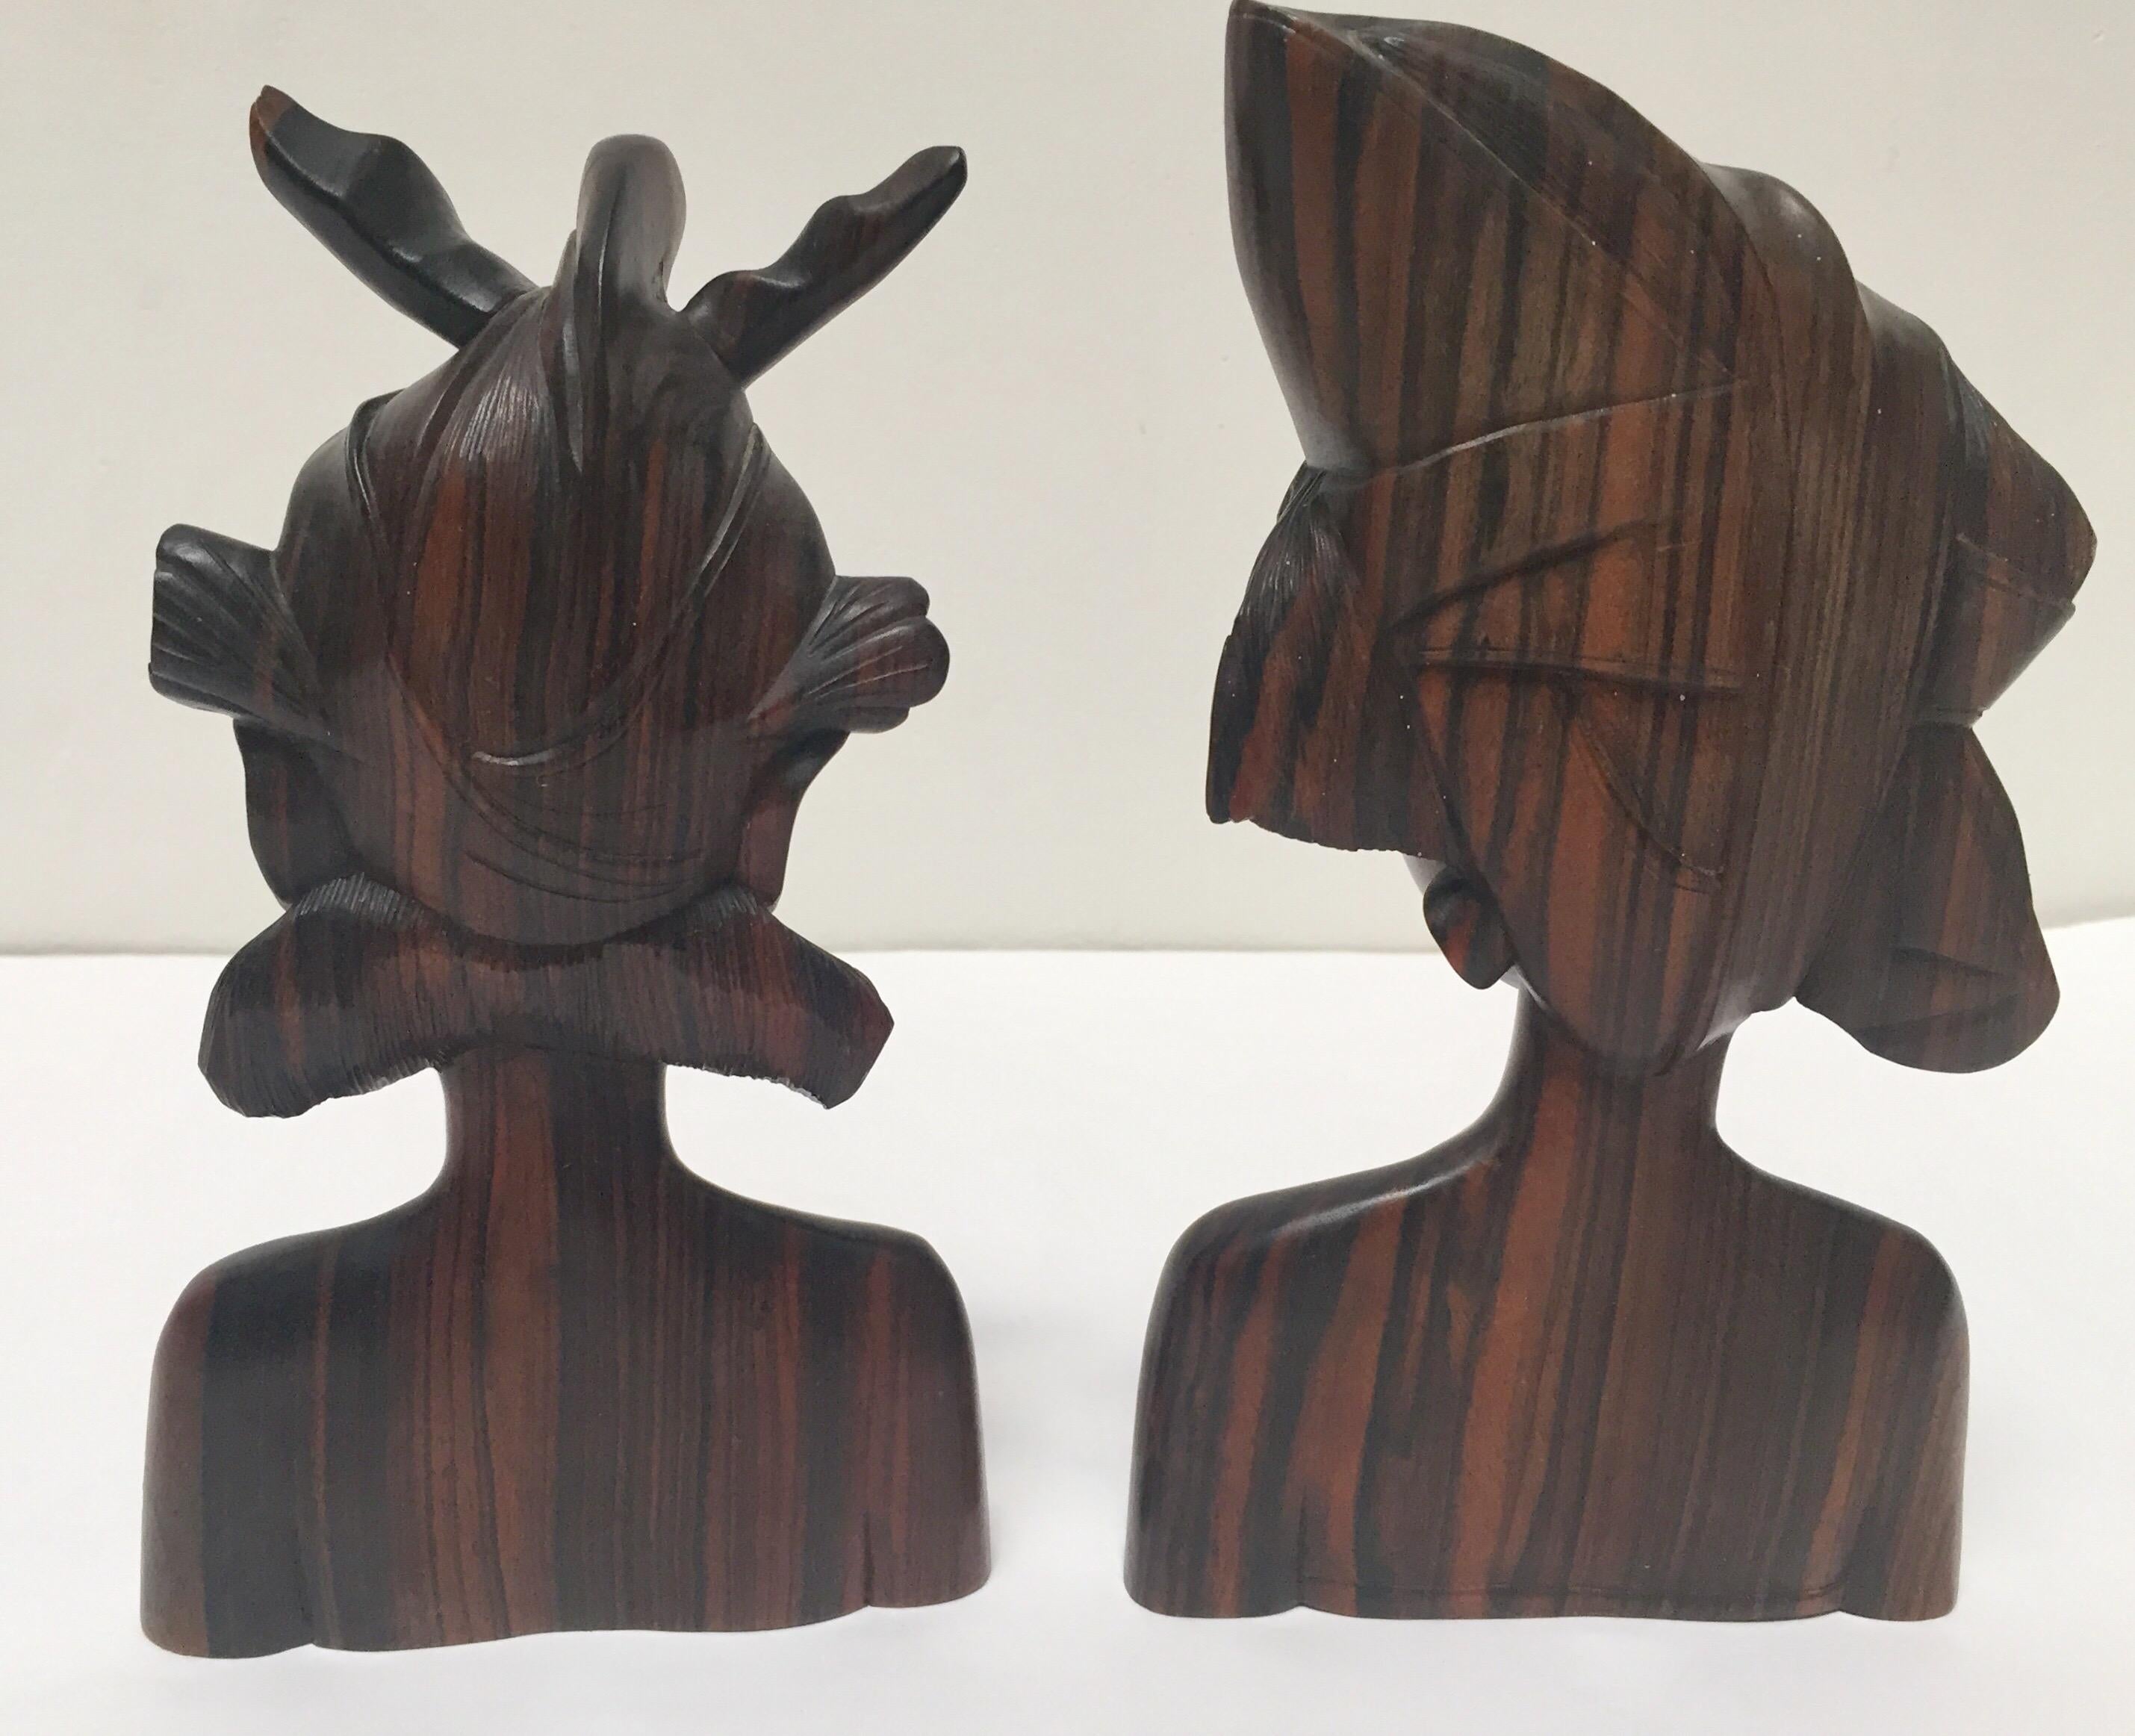 Tribal Hand Carved Wooden Balinese Busts Bookends